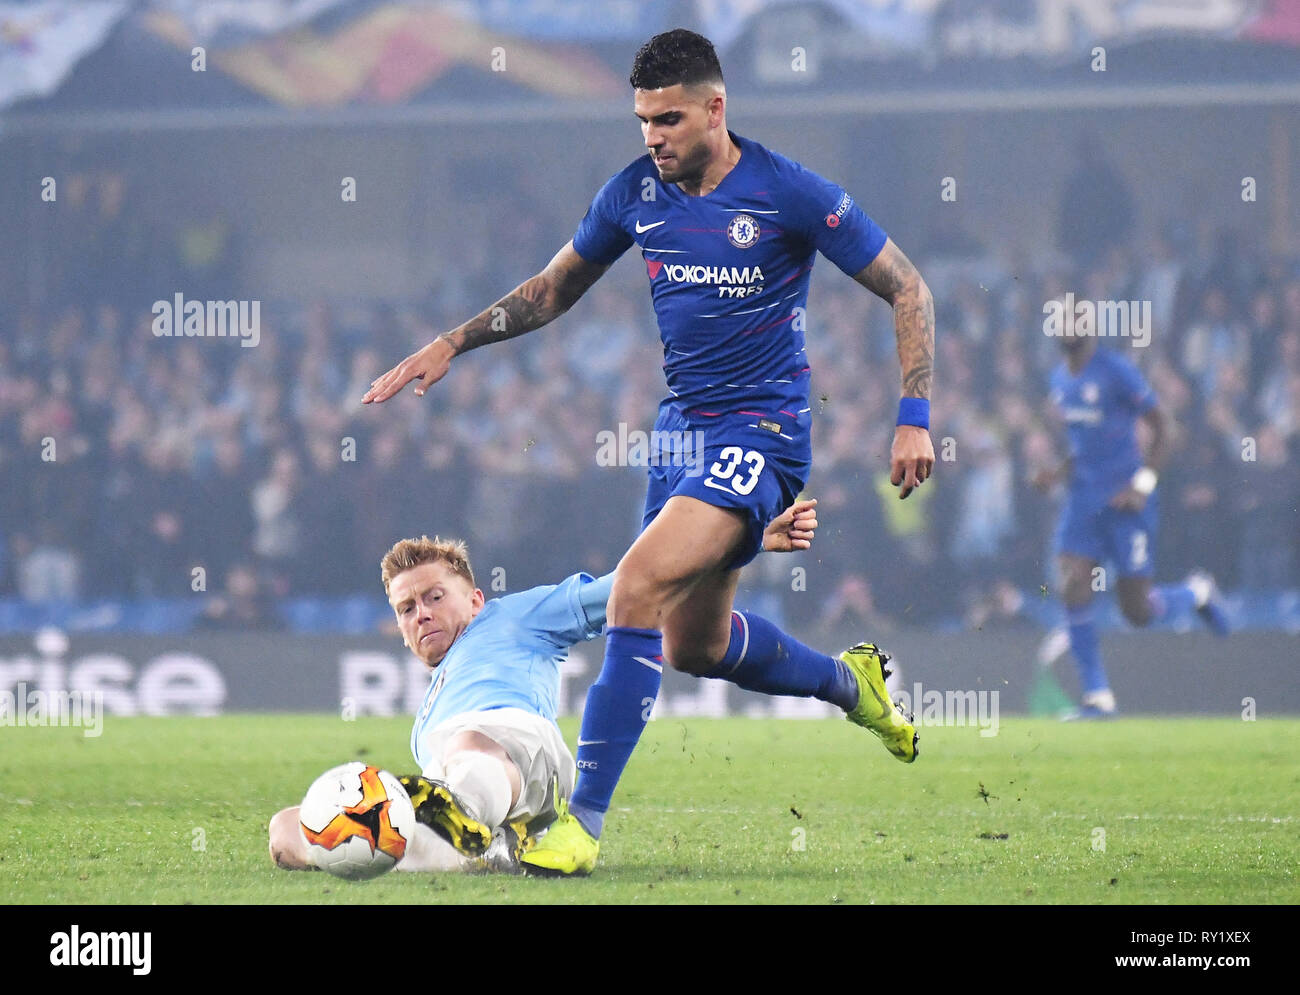 LONDON, ENGLAND - FEBRUARY 21, 2019: Emerson Palmieri dos Santos of Chelsea pictured during the second leg of the 2018/19 UEFA Europa League Round of 32 game between Chelsea FC (England) and Malmo FF (Sweden) at Stamford Bridge. Stock Photo